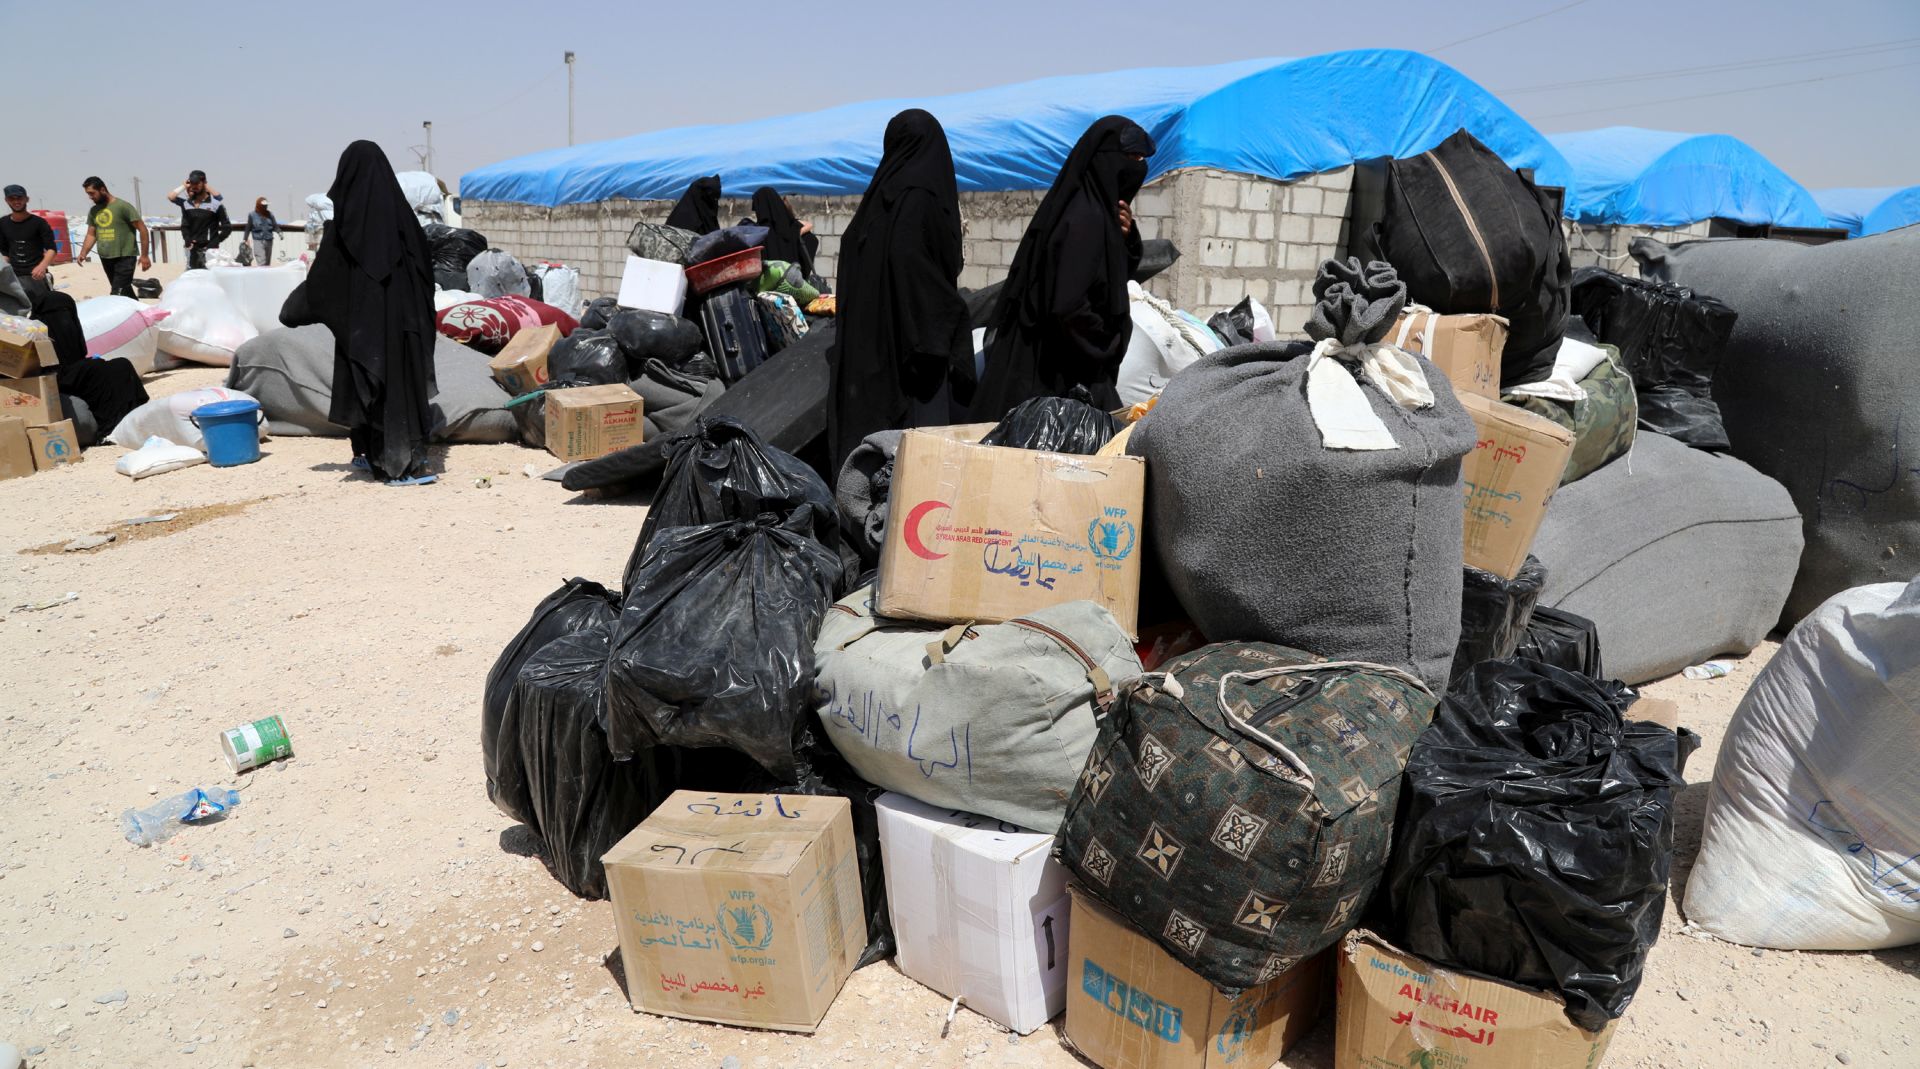 epa07623496 Wives of Islamic state fighters (IS) wait next to their belongings upon their deportation from the al-Hol camp for refugees in al-Hasakah governorate in northeastern Syria on 03 June 2019 (issued 04 June 2019).  According to media reports, the Kurdish authorities in northeast Syria are handing over 800 women and children all of them Syrian, including relatives of Islamic state fighters, to their families in the first such transfer from an overcrowded camp.  EPA/AHMED MARDNLI